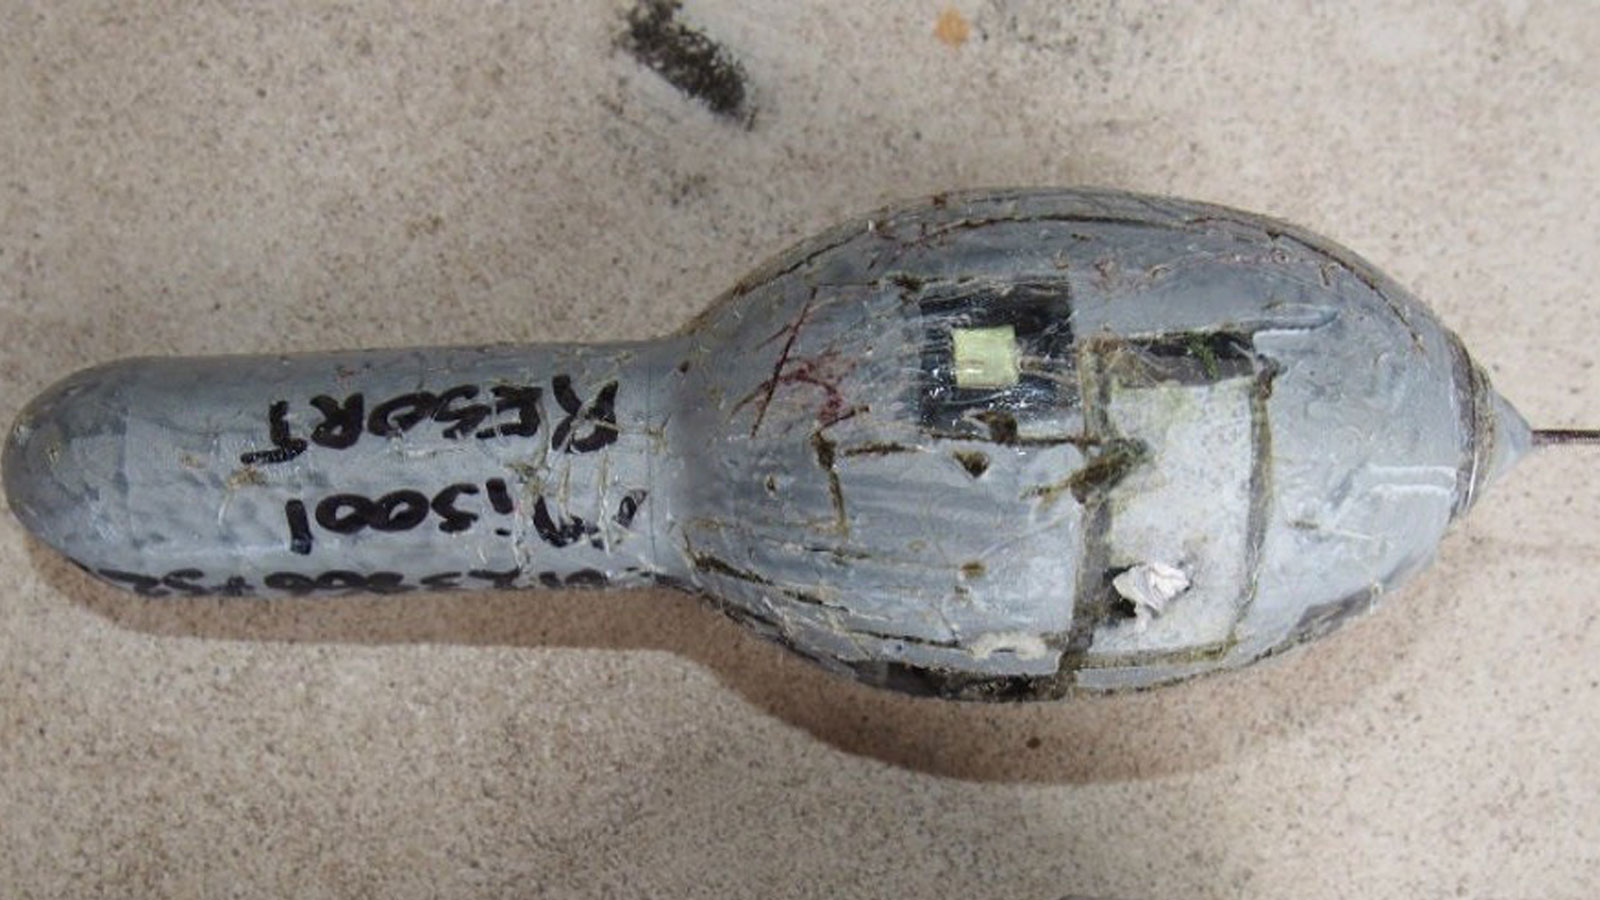 Satellite tag recovered after 6 months in the water